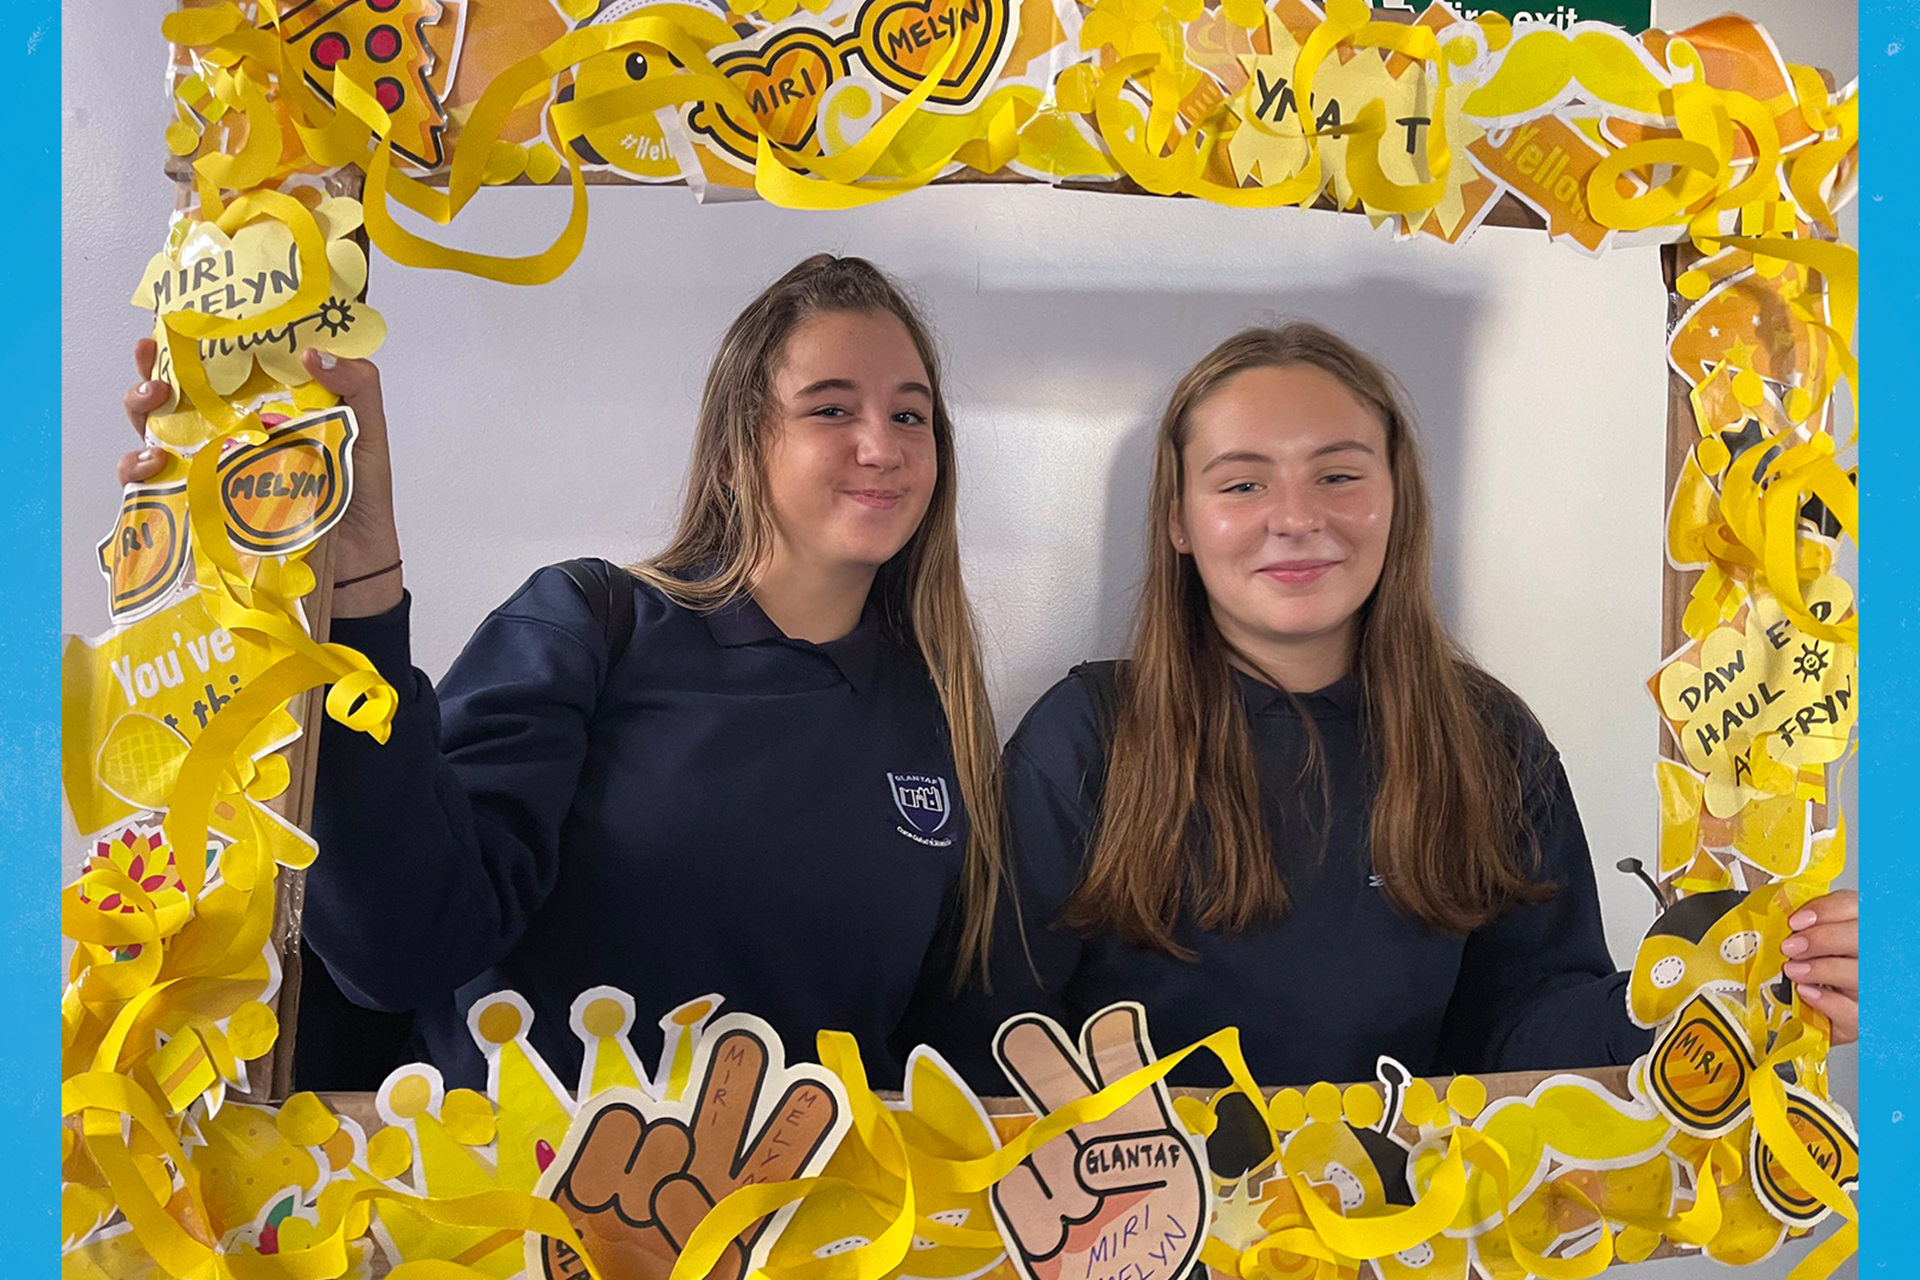 Two students from Ysgol Glantaf holding up a yellow frame and smiling.